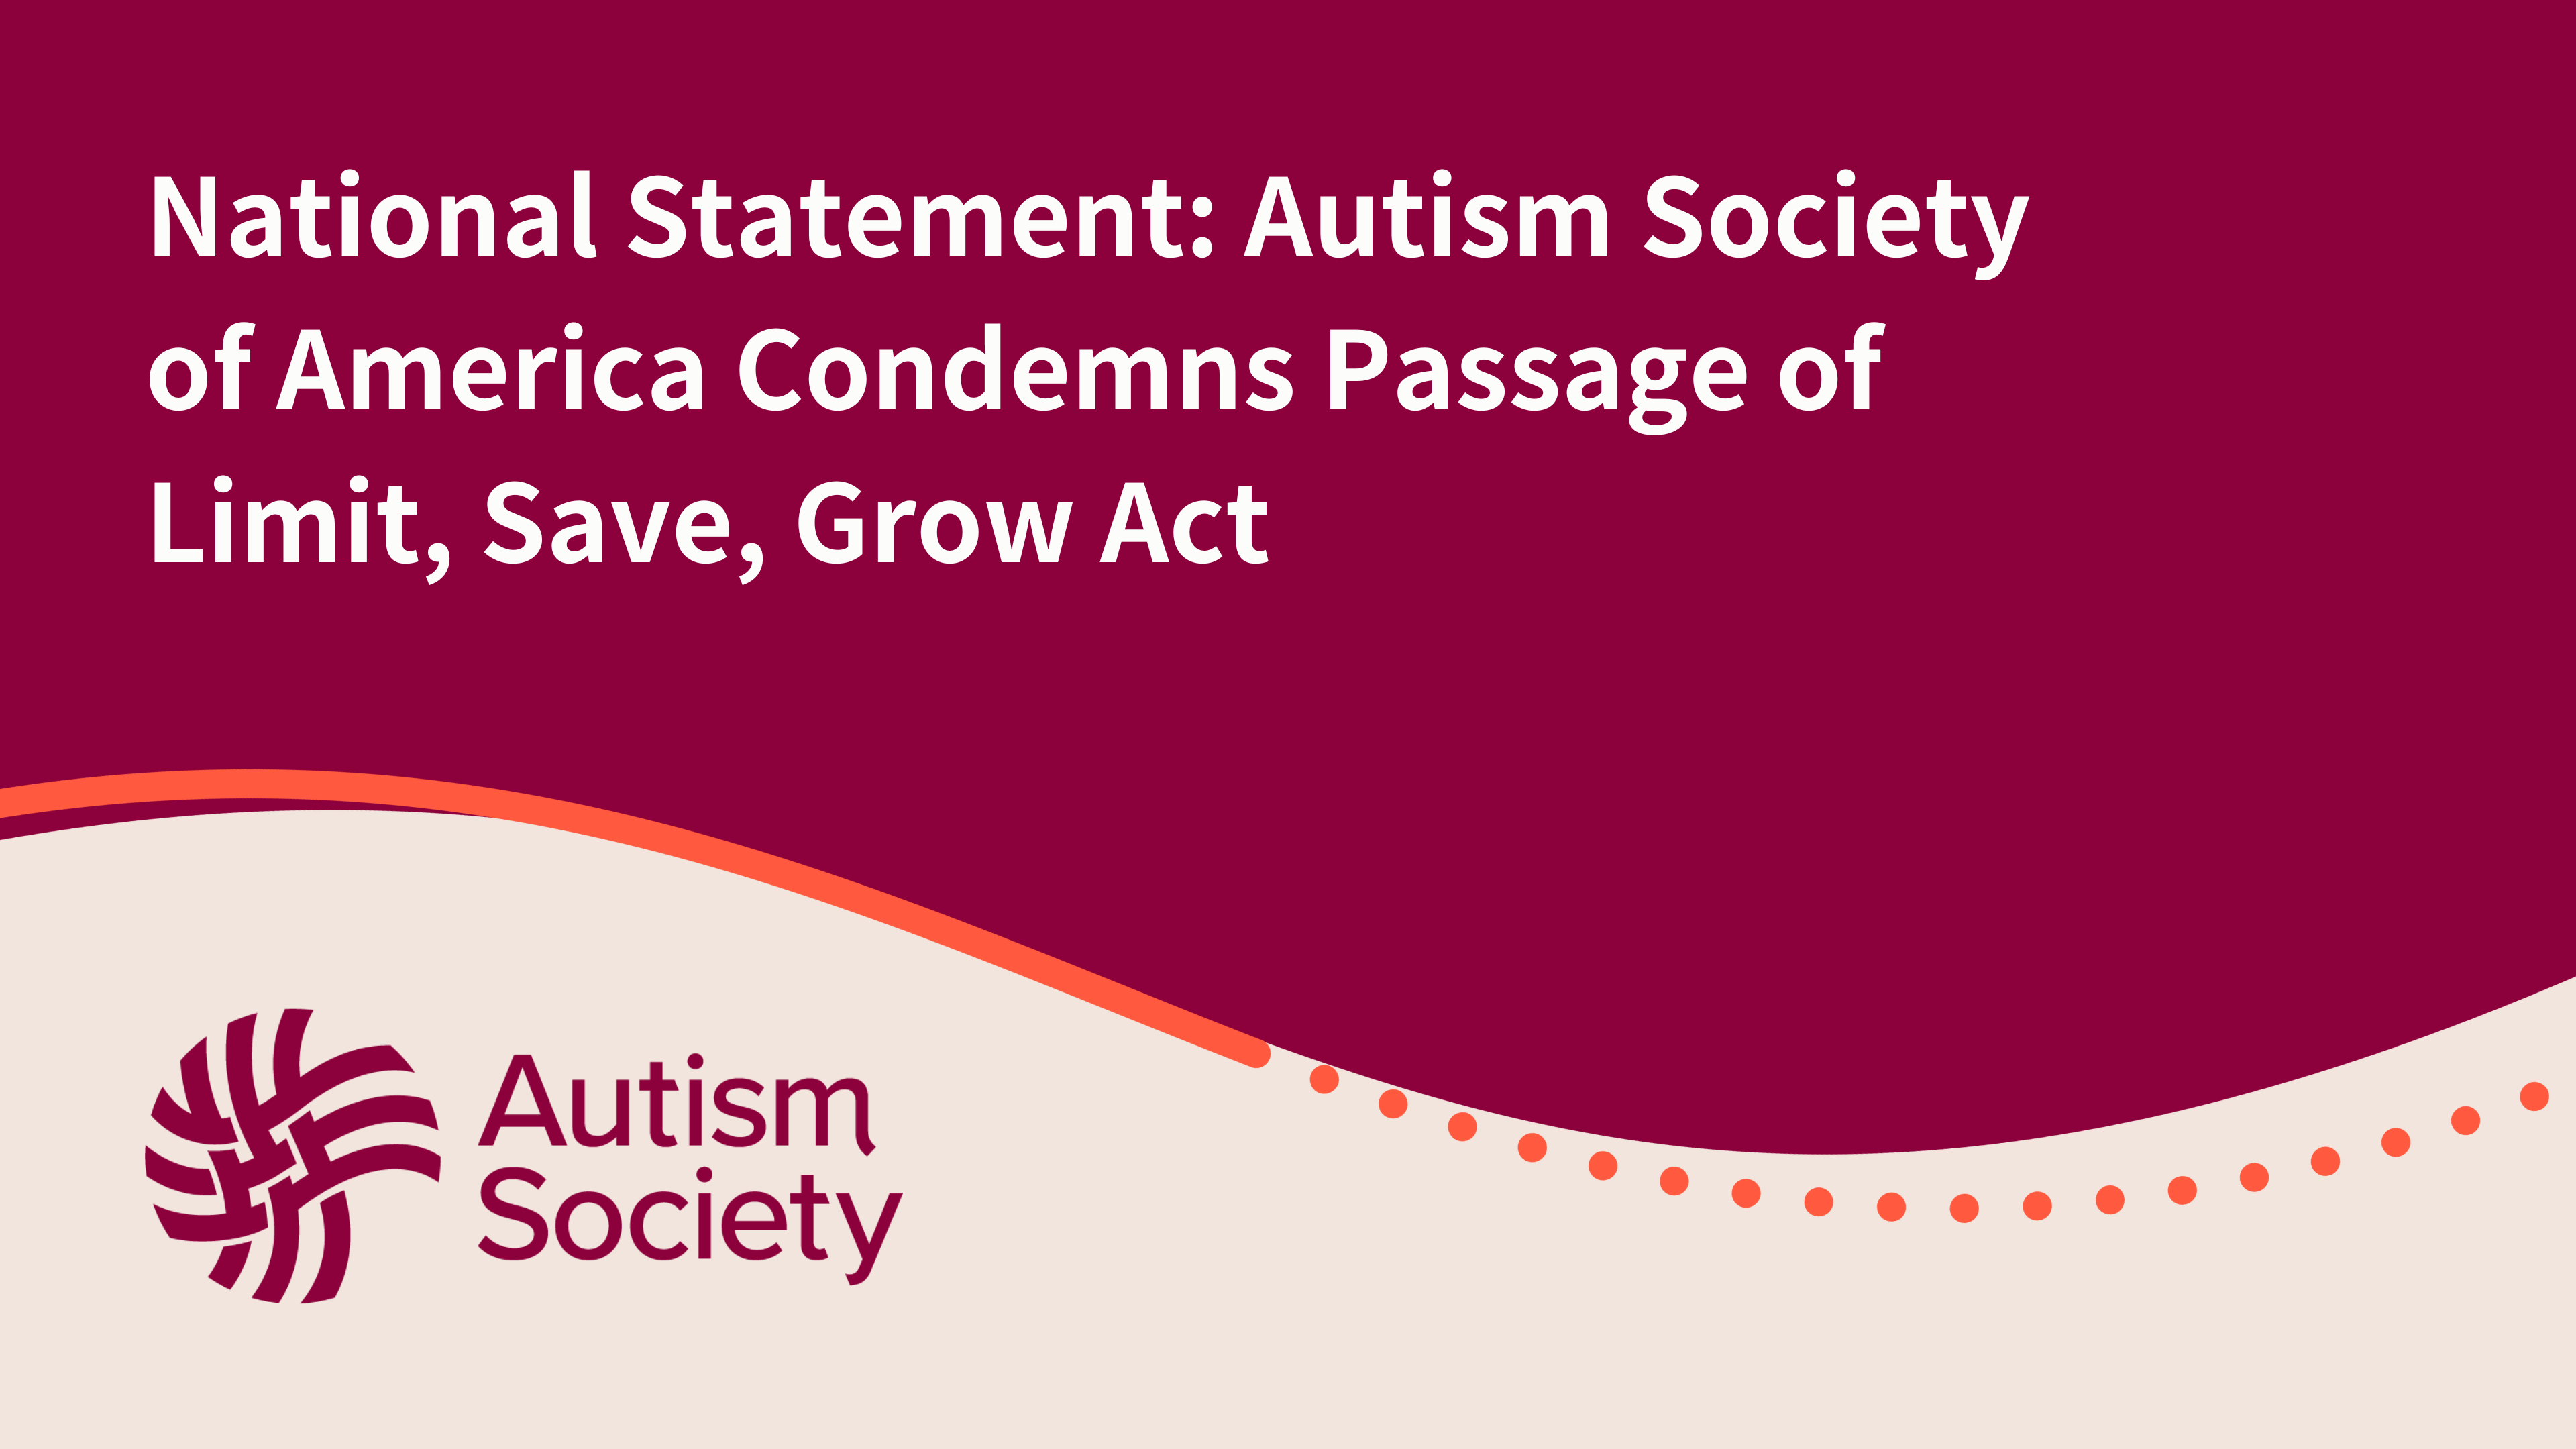 National Statement Autism Society of America Condemns Passage of Limit